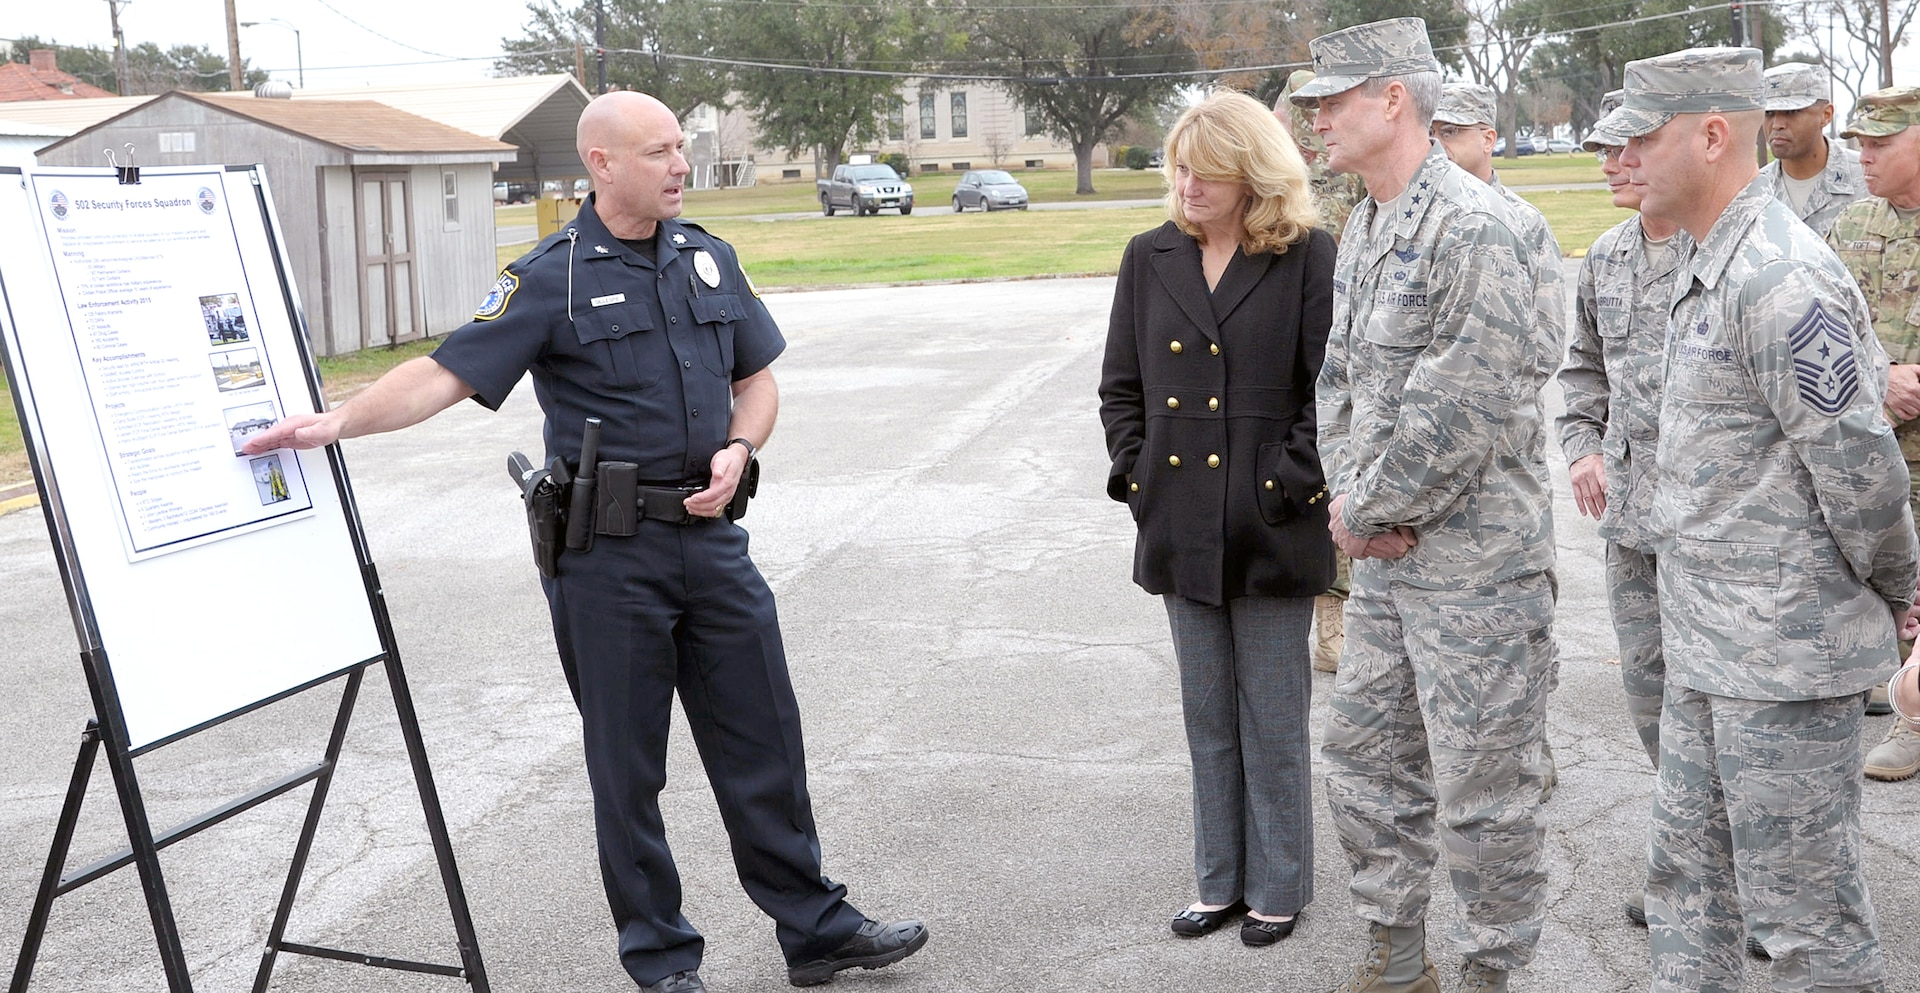 Bryan Gillespie (left), 502nd Security Forces Squadron director, briefs Lt. Gen. Darryl Roberson, commander of Air Education and Training Command, his wife, Cheryl; and Chief Master Sergeant David R. Staton, AETC command chief master sergeant, on the 502nd SFS mission Jan. 20 at Joint Base San Antonio-Fort Sam Houston’s Base Defense Operations Center.